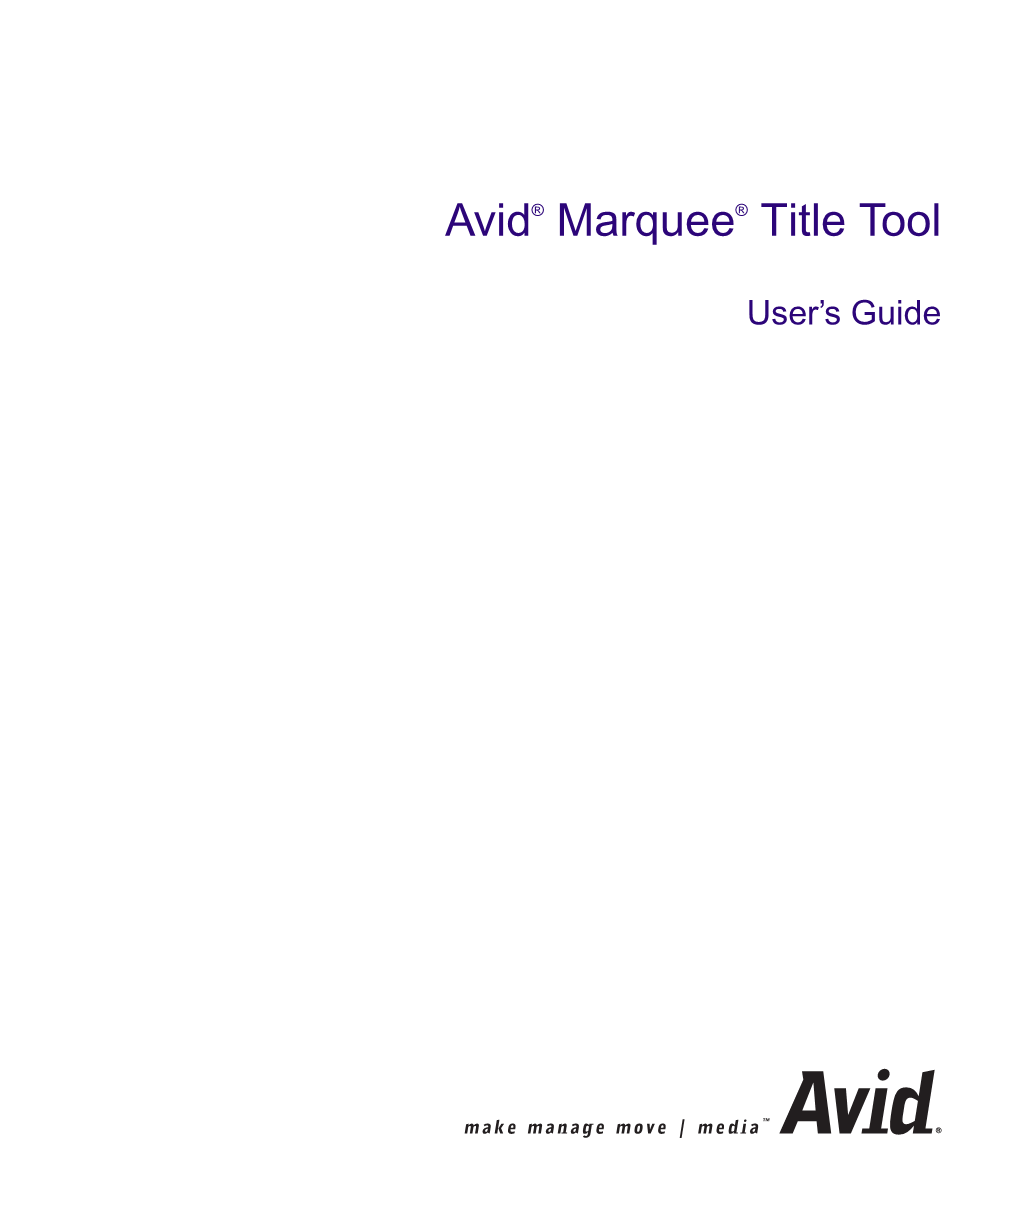 Avid Marquee Title Tool User's Guide